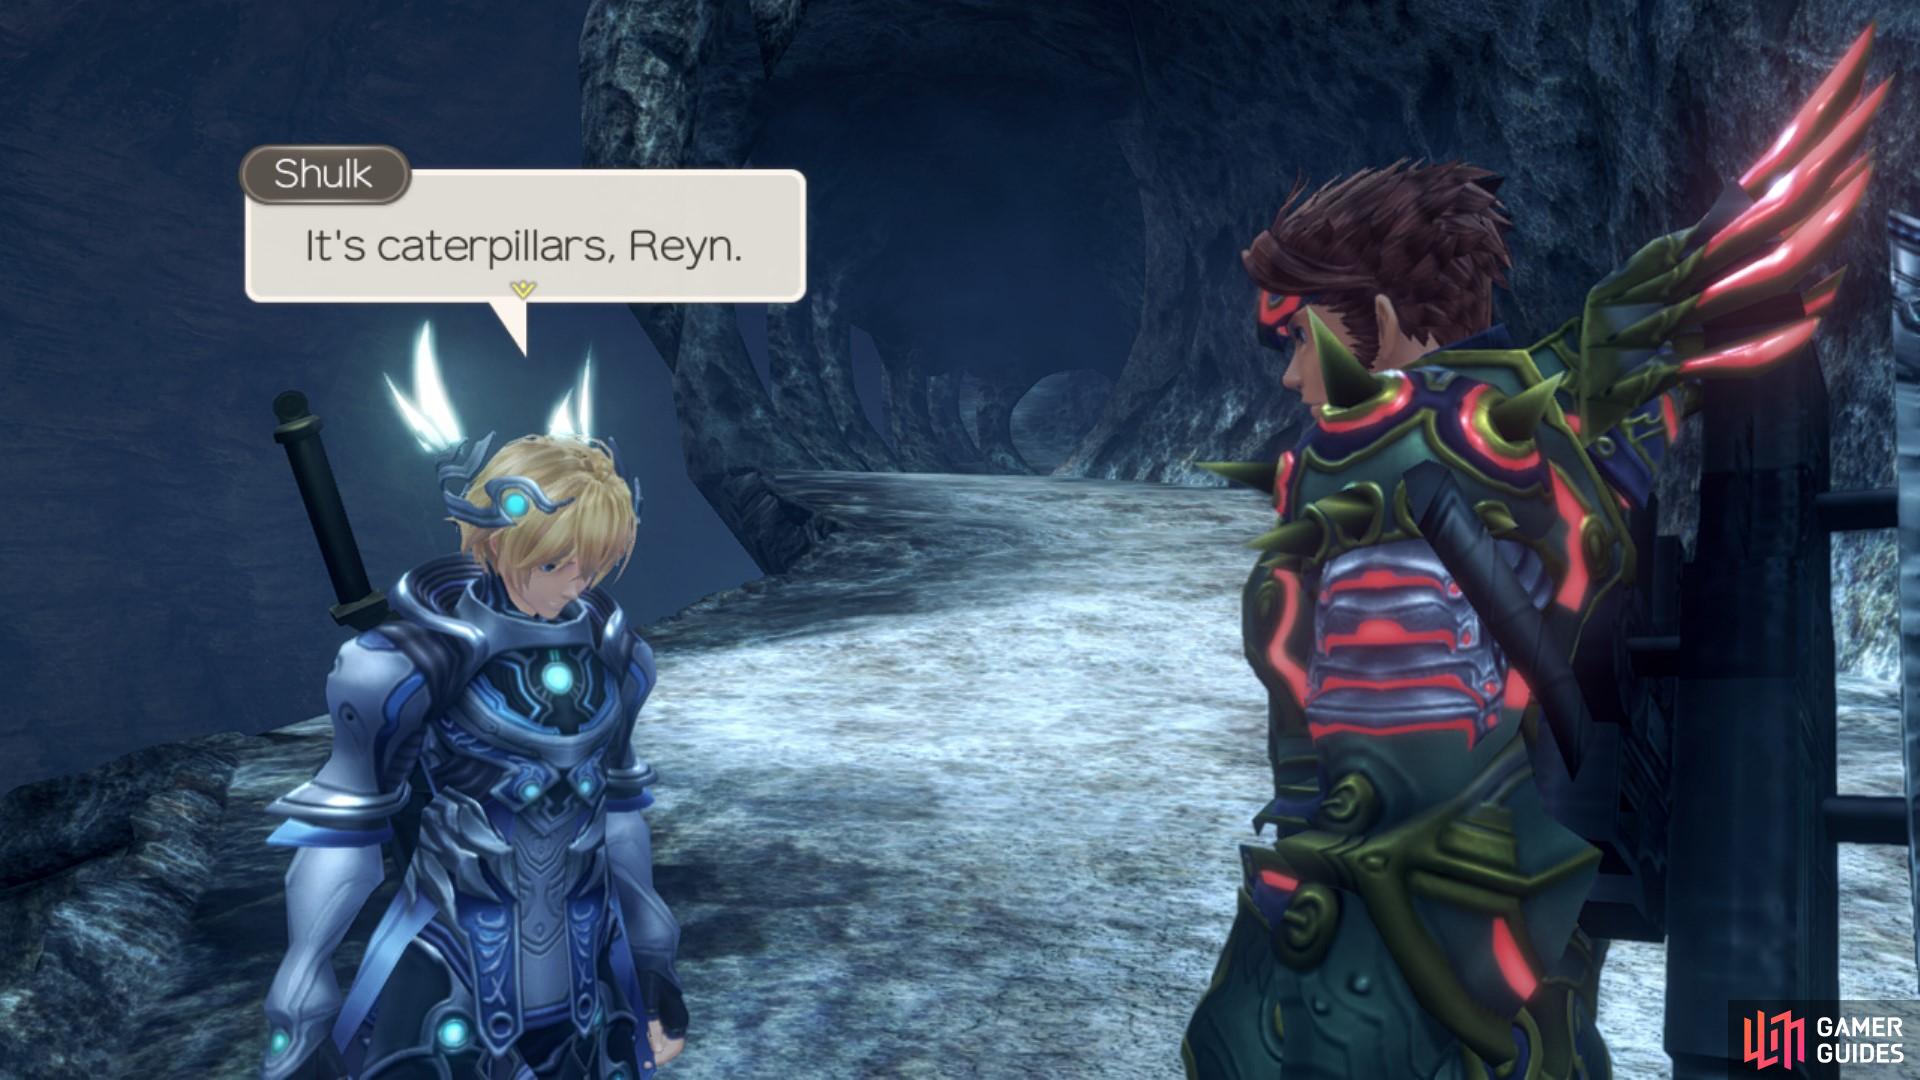 and Shulk is scared of caterpillars.